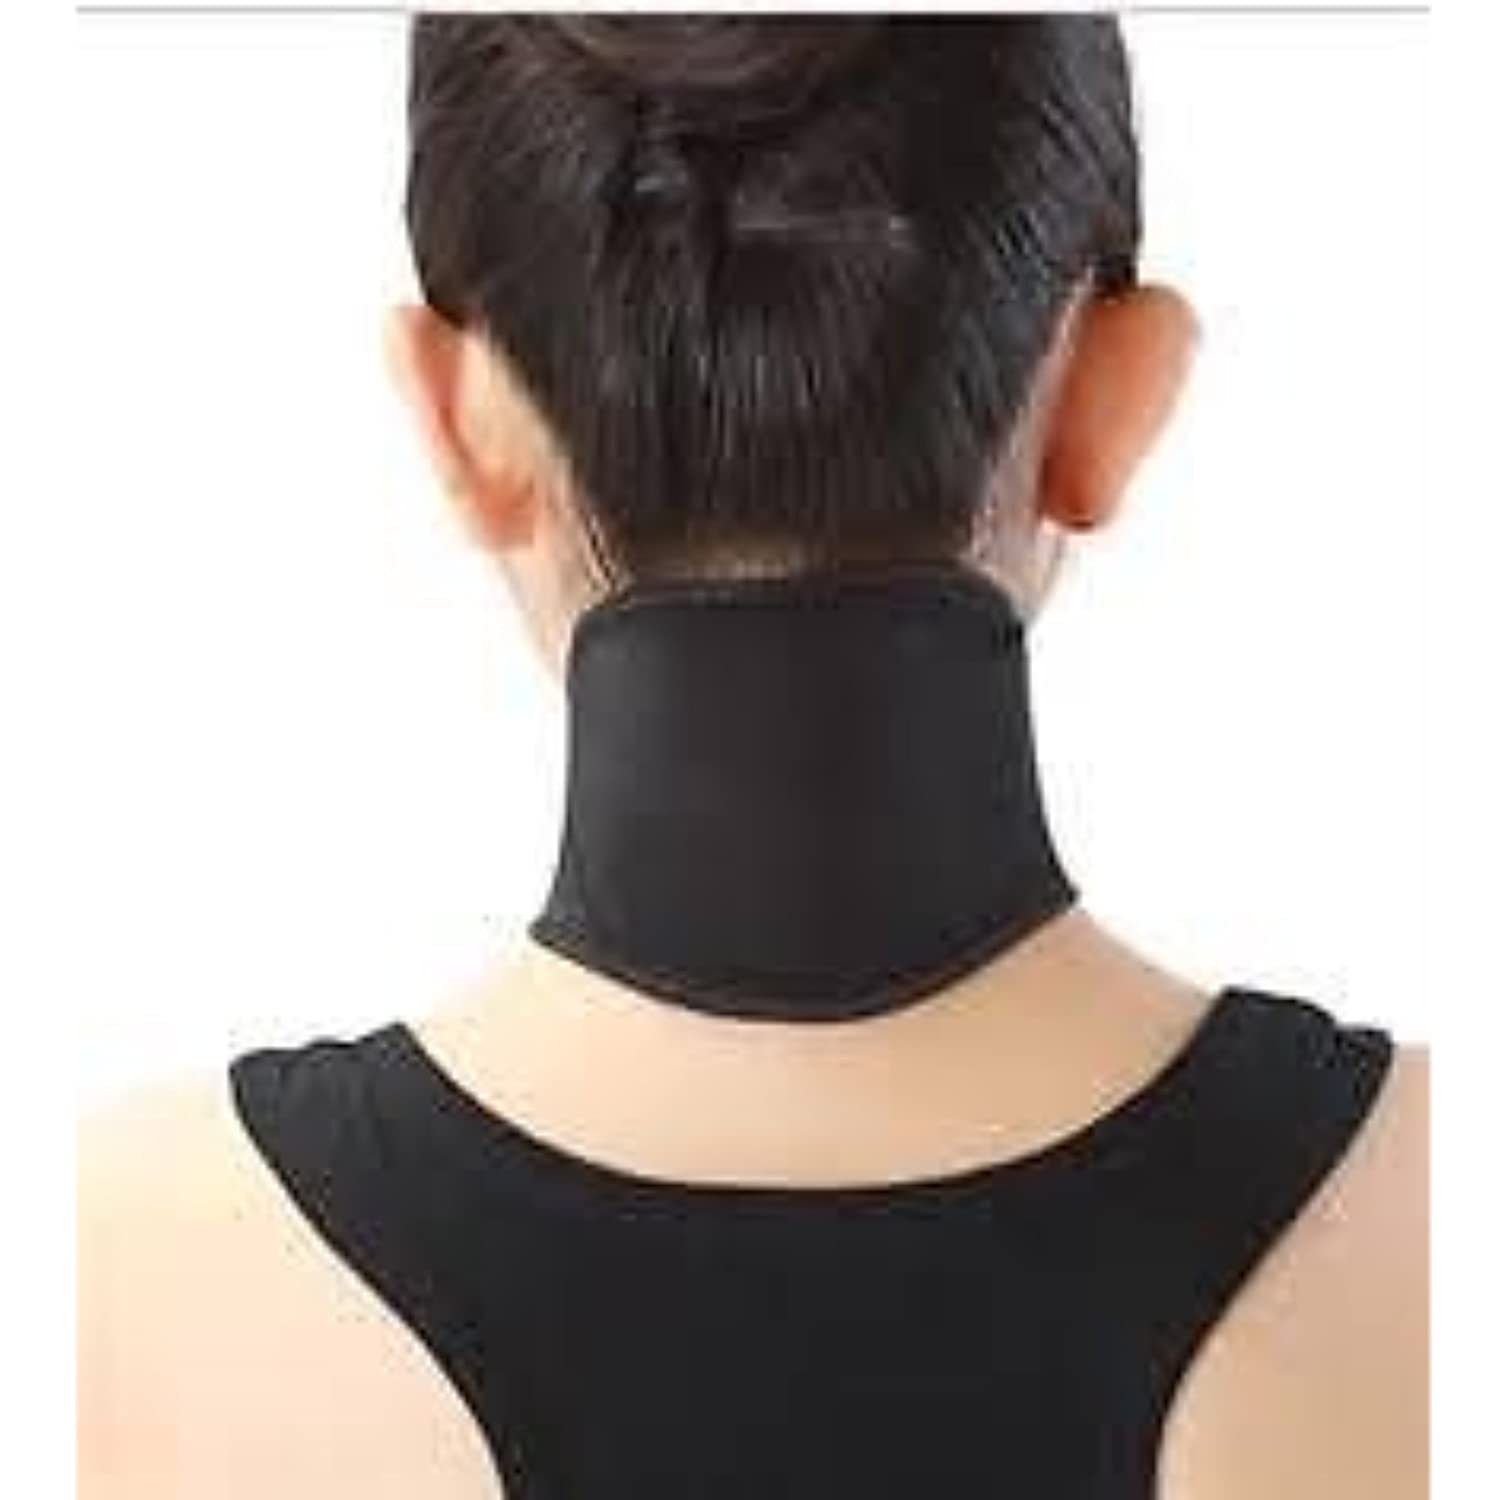 Importikaah-self-heating-therapy-set-for-neck-pain-relief-(2 pcs)